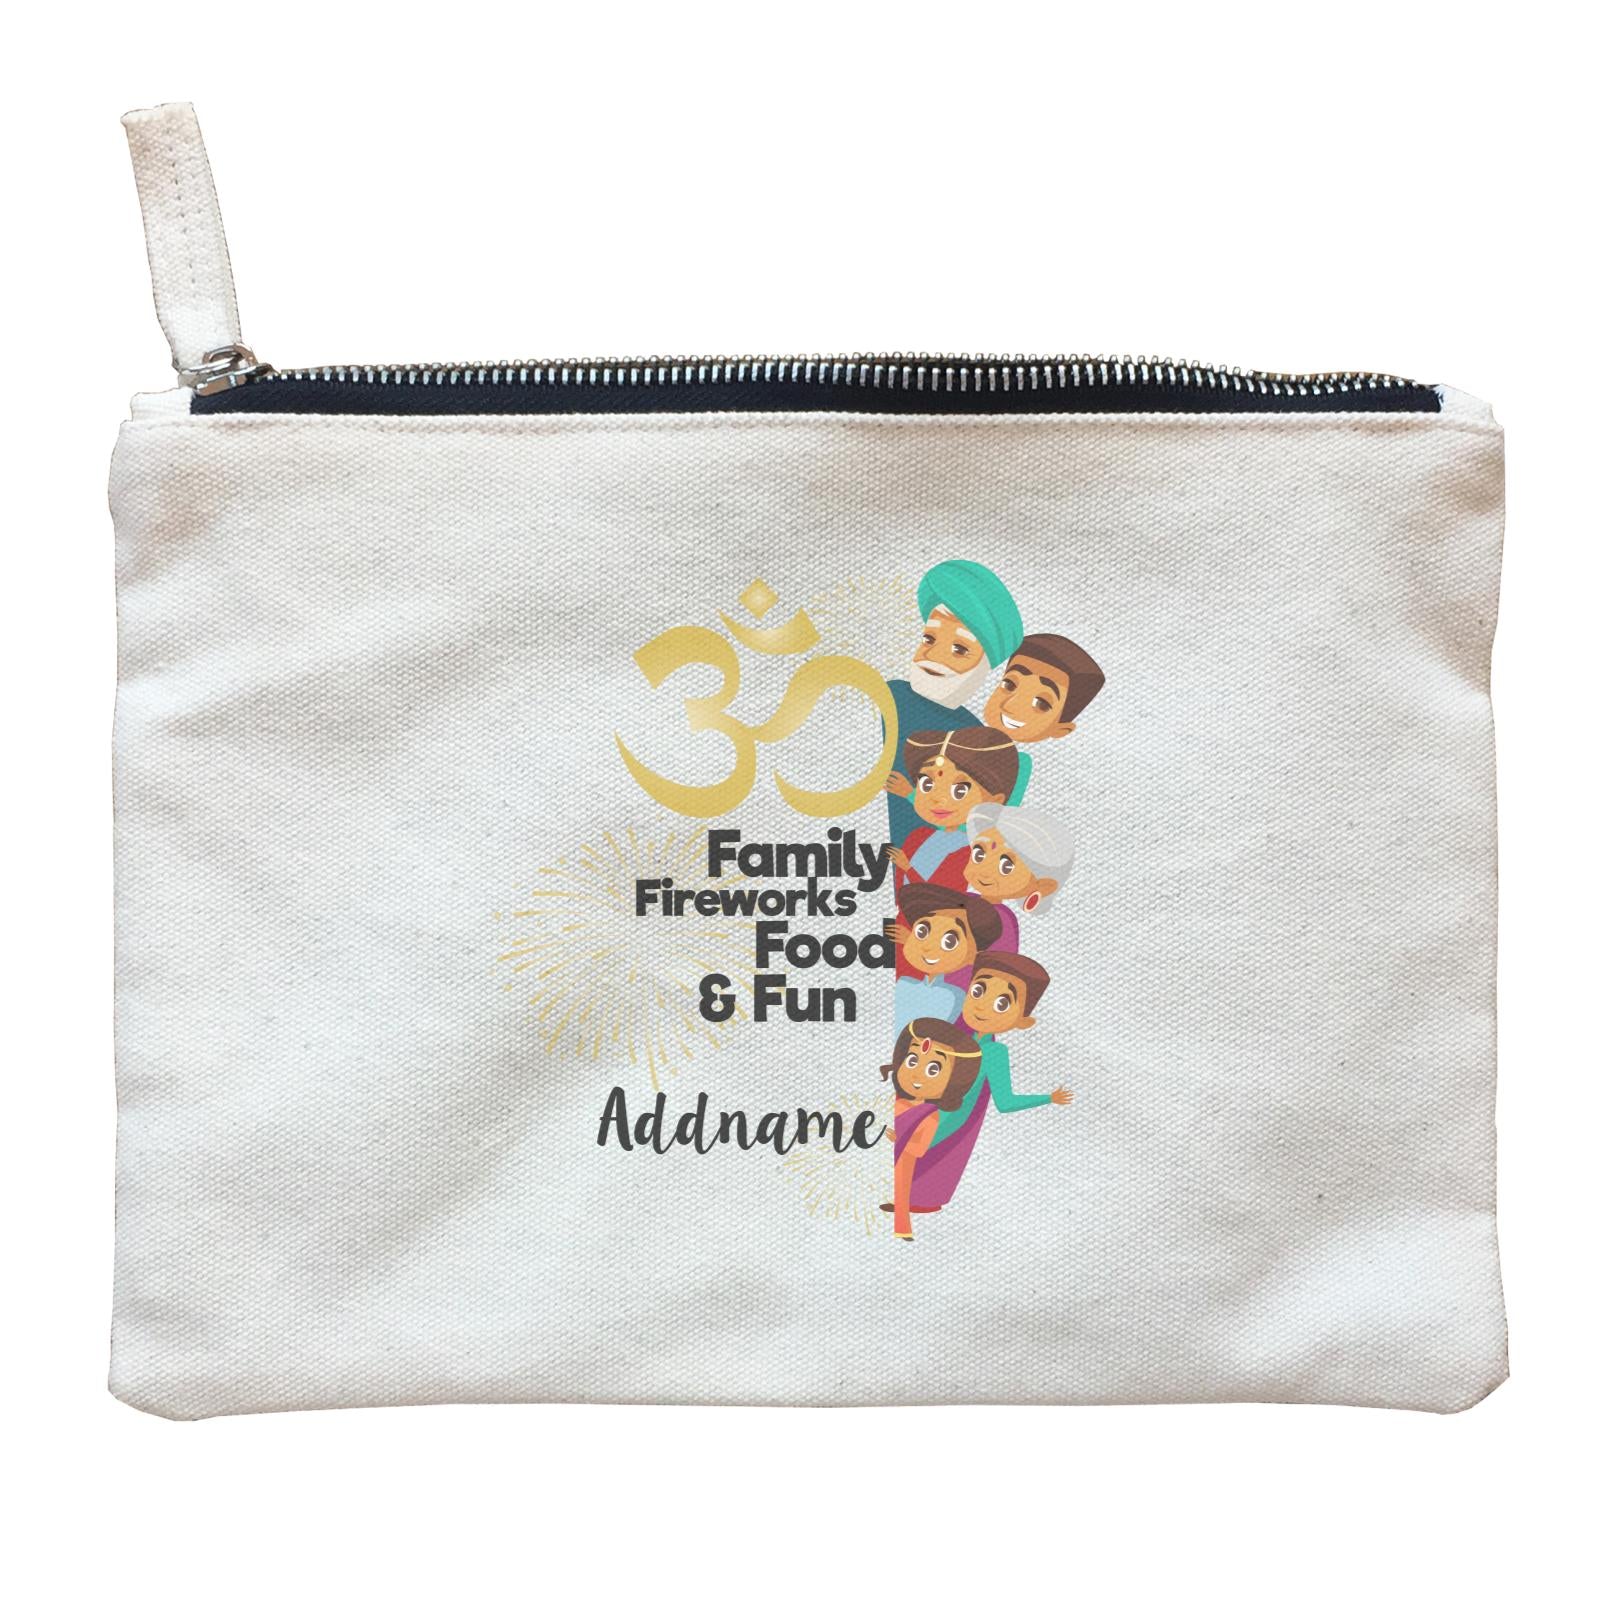 Cute Family OM Family Fireworks Food and Fun Addname Zipper Pouch